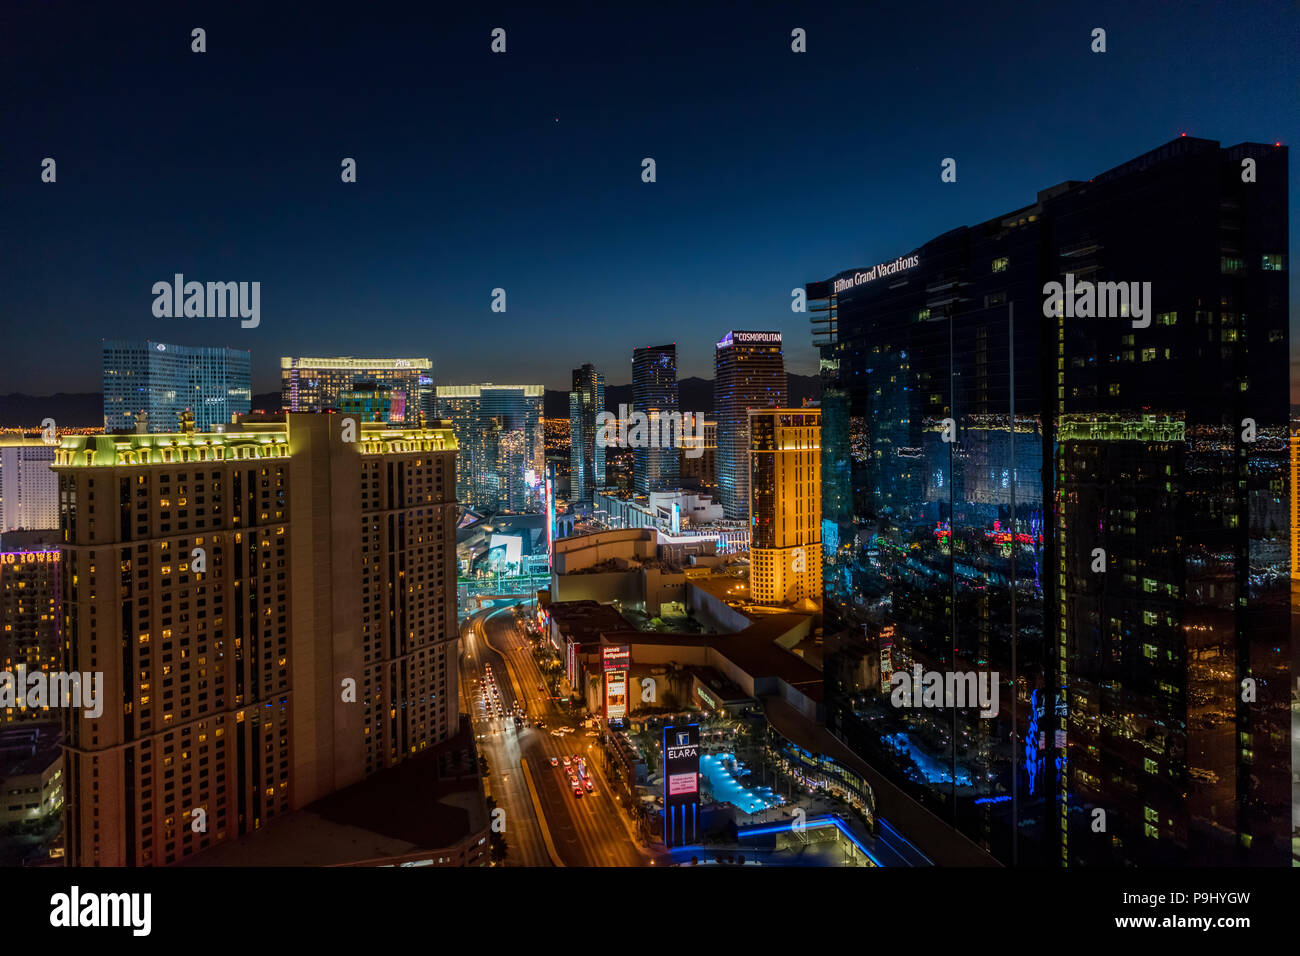 Elevated view of The Strip, Las Vegas, Nevada, USA. Hilton Grand Vacations Hotel and Casino in the centre. Night photography. Stock Photo